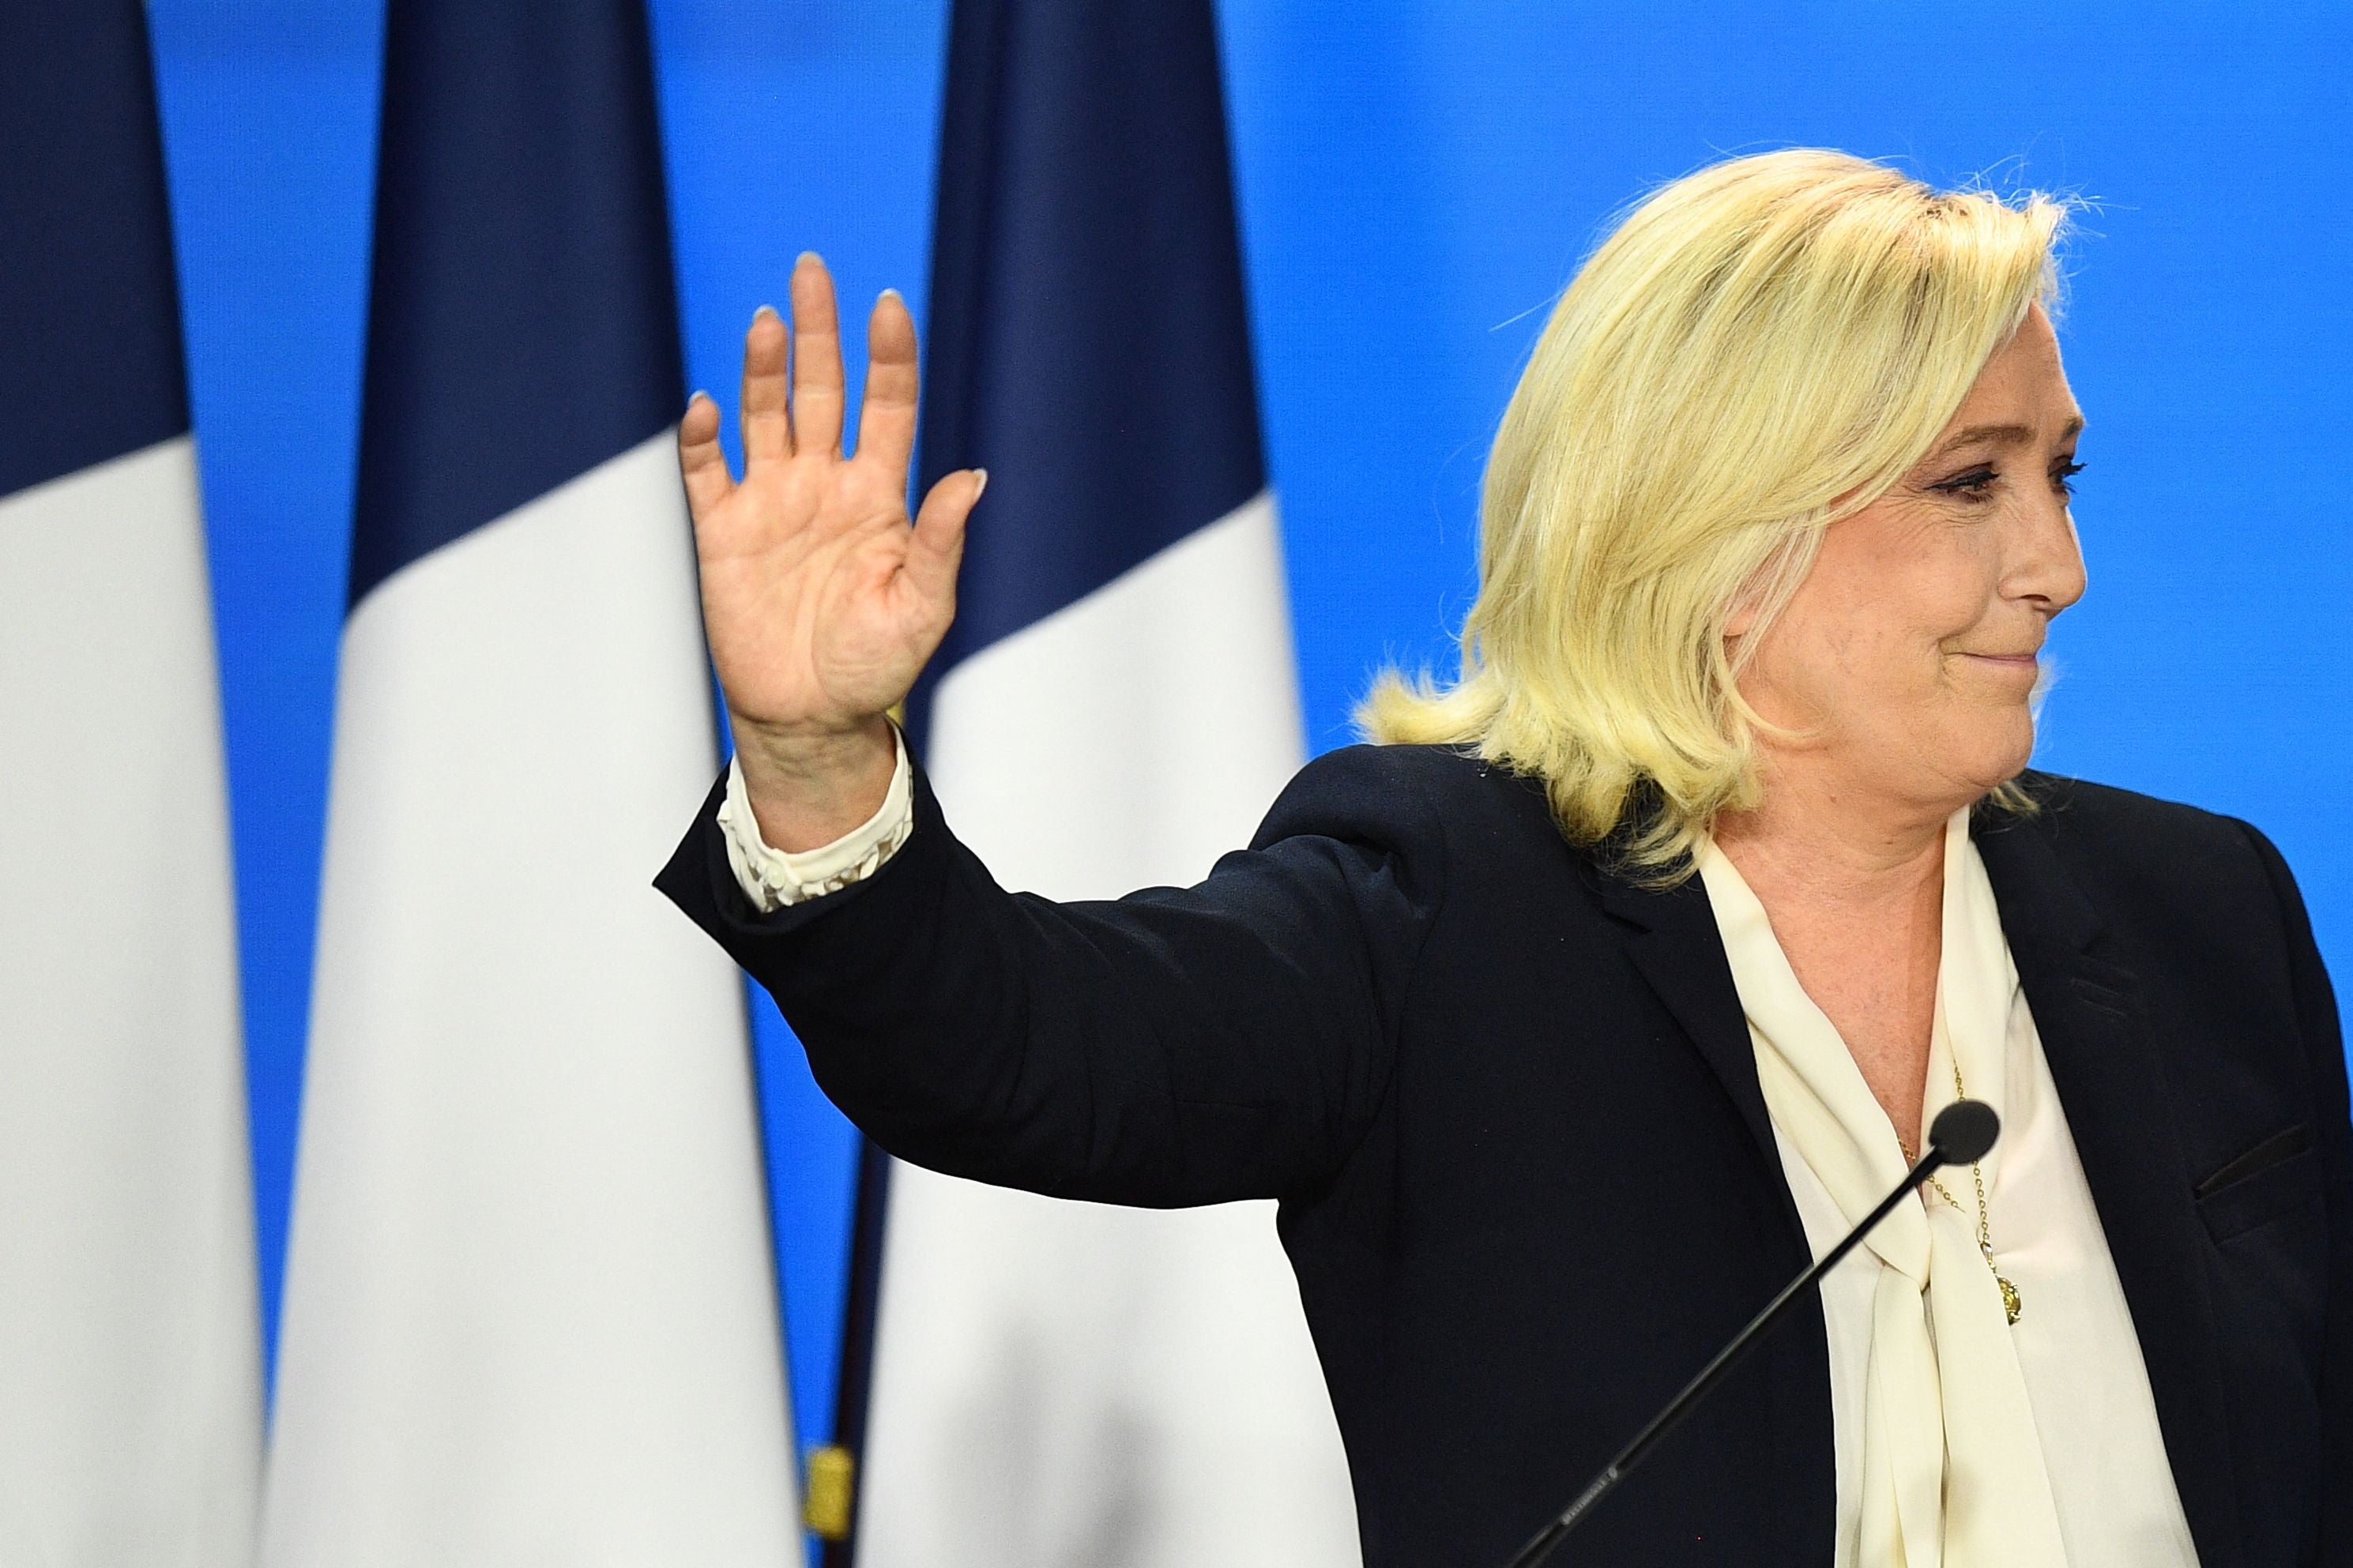 We need to accept that Marine Le Pen is popular